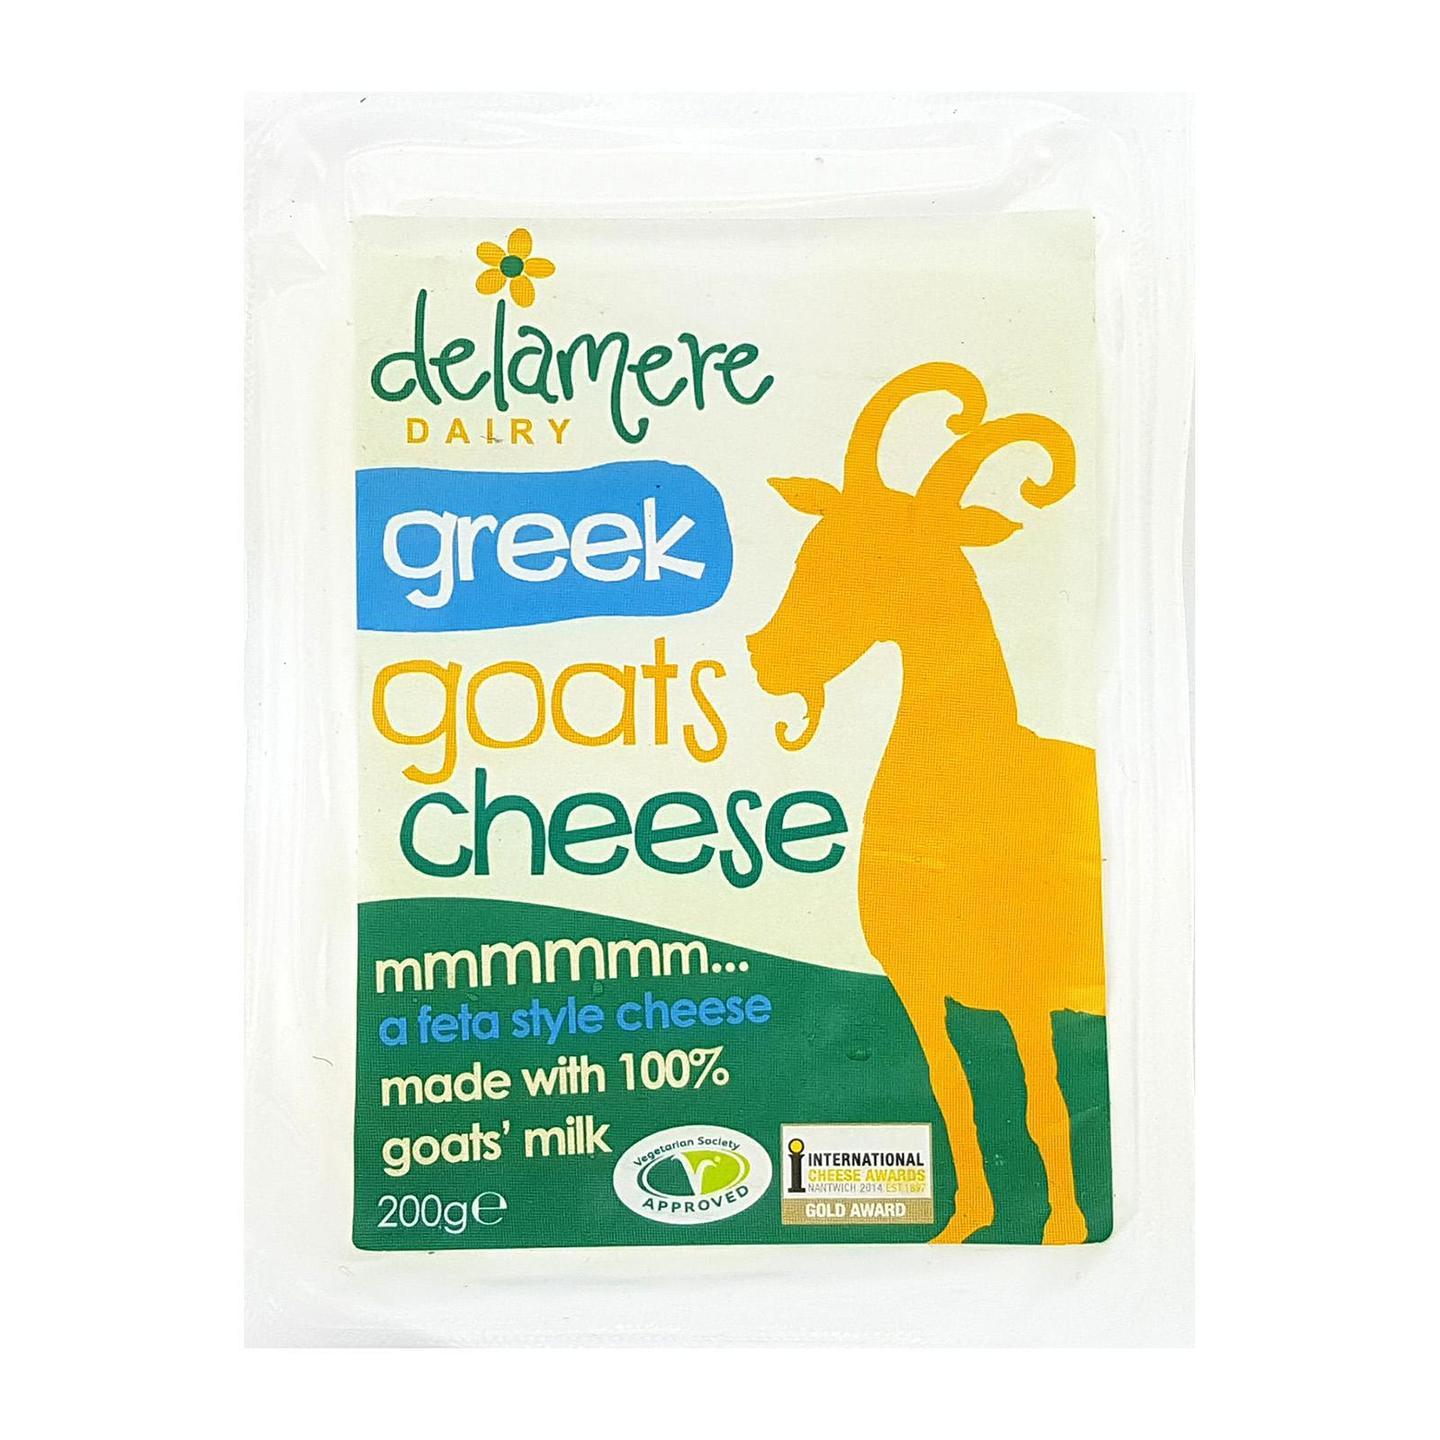 Delamere Dairy Greek Goats Cheese